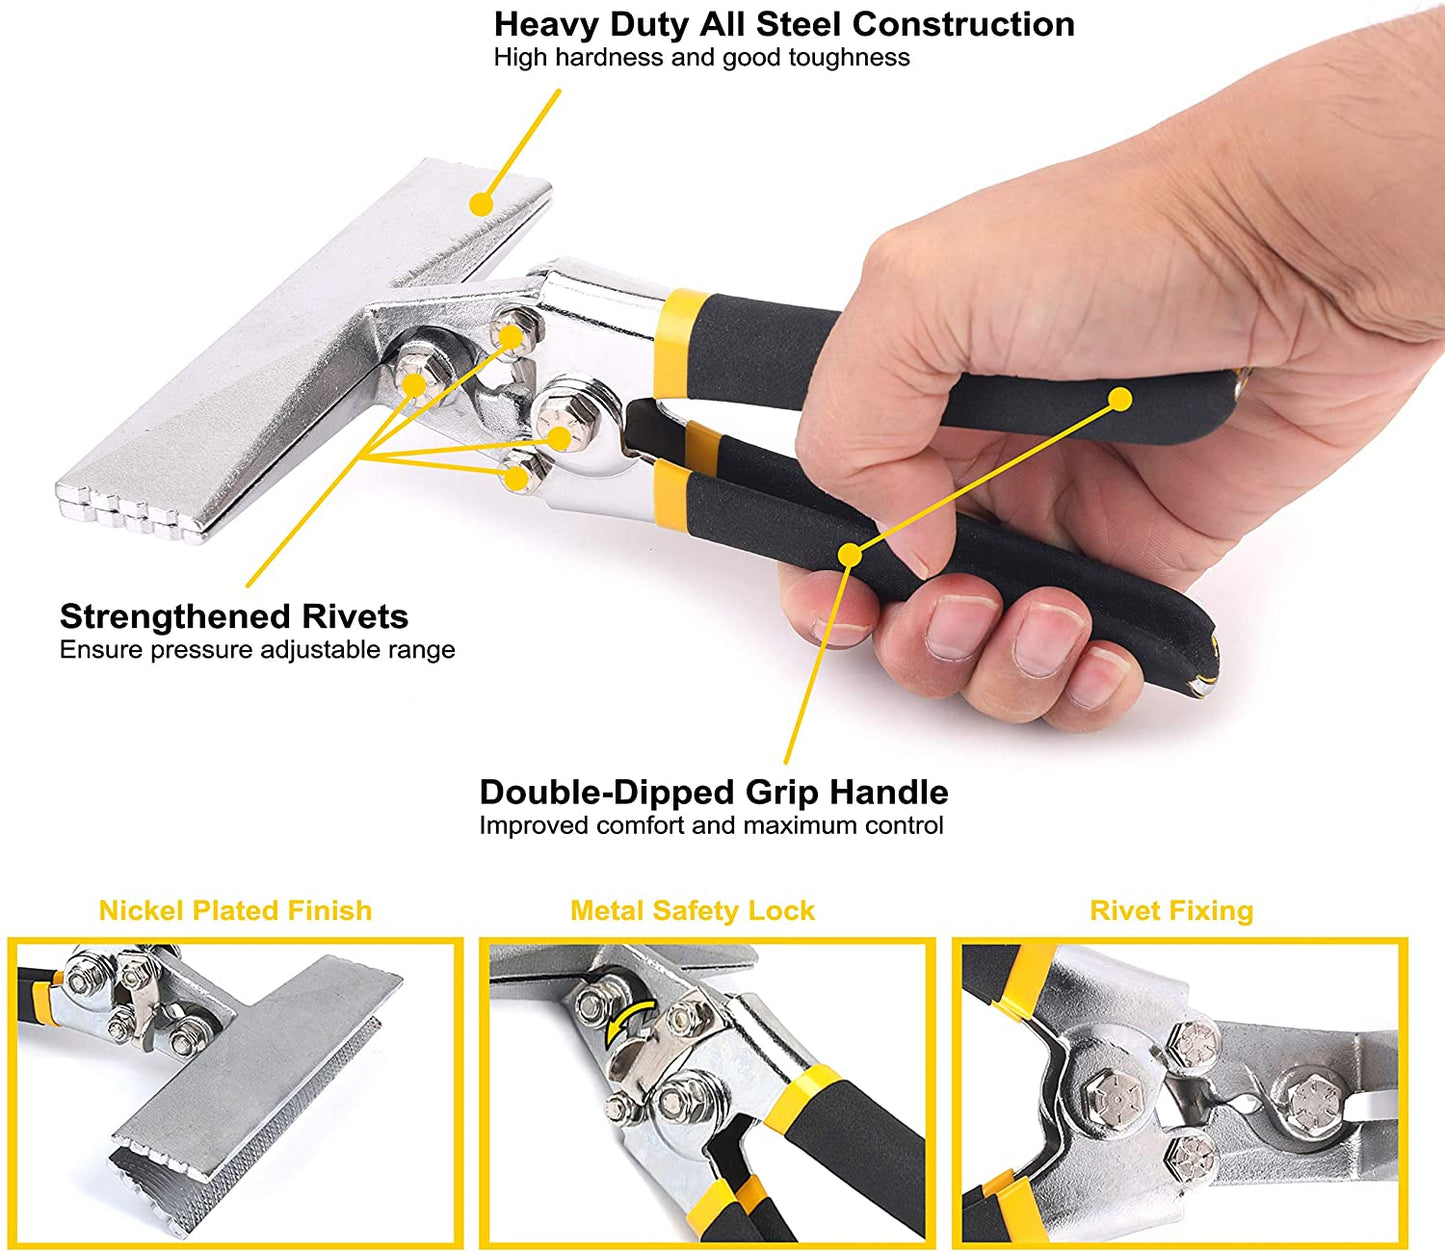 A hand holds a Perma Cover High Quality Sheet Metal Hand Seamers - Multiple Sizes Available with rubber grips. Text points to features: "Heavy Duty All Steel Construction," "Strengthened Rivets," "Double-Dipped Grip Handle," "Nickel Plated Finish," "Metal Safety Lock," and "Rivet Fixing." Insets show close-ups of the seamer parts, ideal for bending.